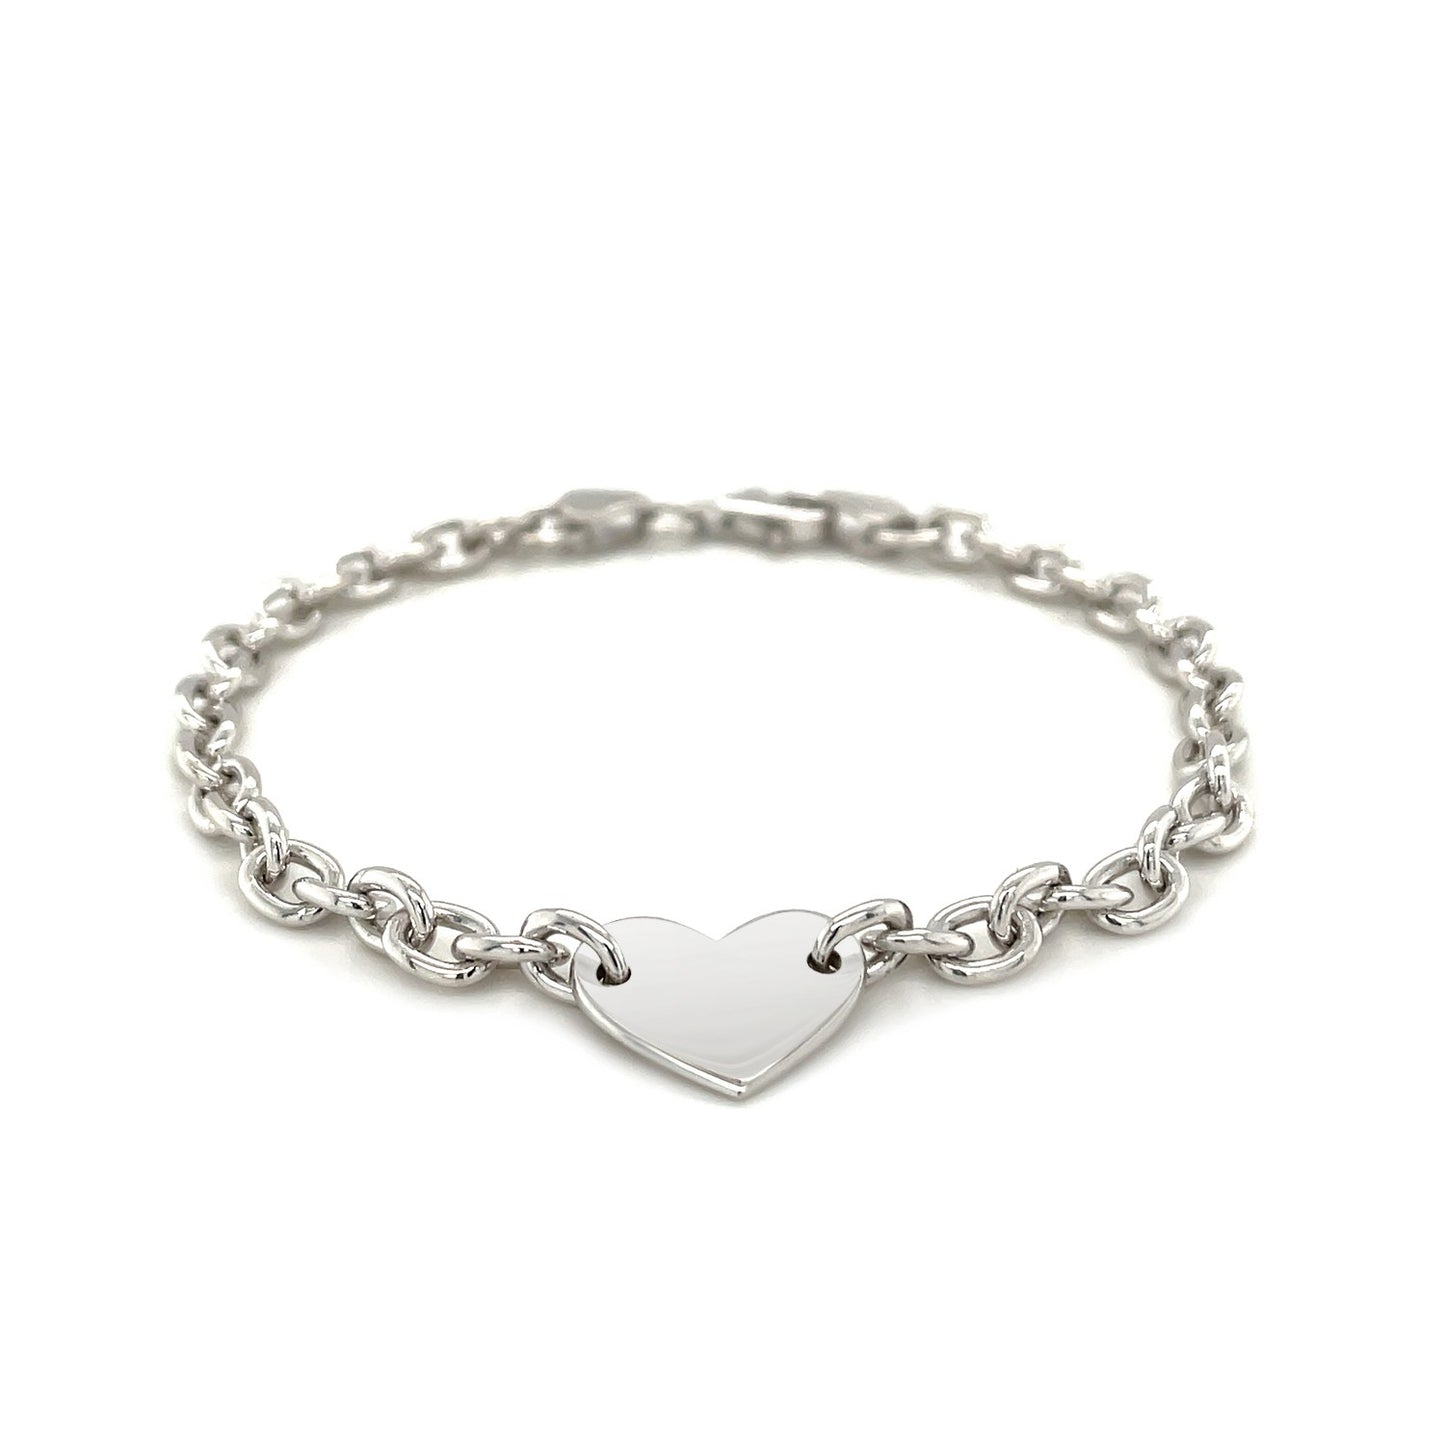 Sterling Silver Rhodium Plated Chain Bracelet with a Flat Heart Station